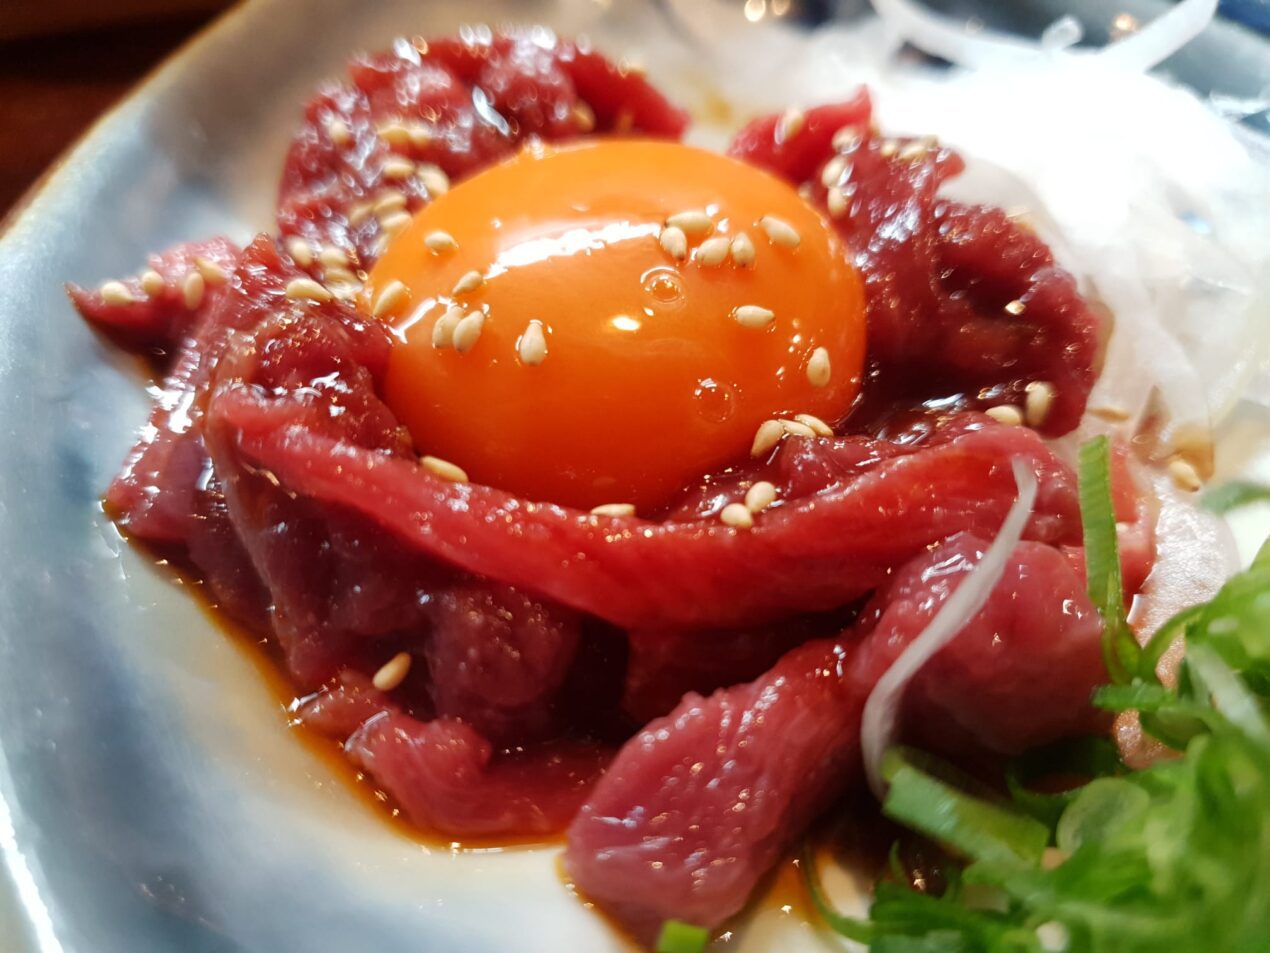 horse meat tartare with raw egg yolk on top